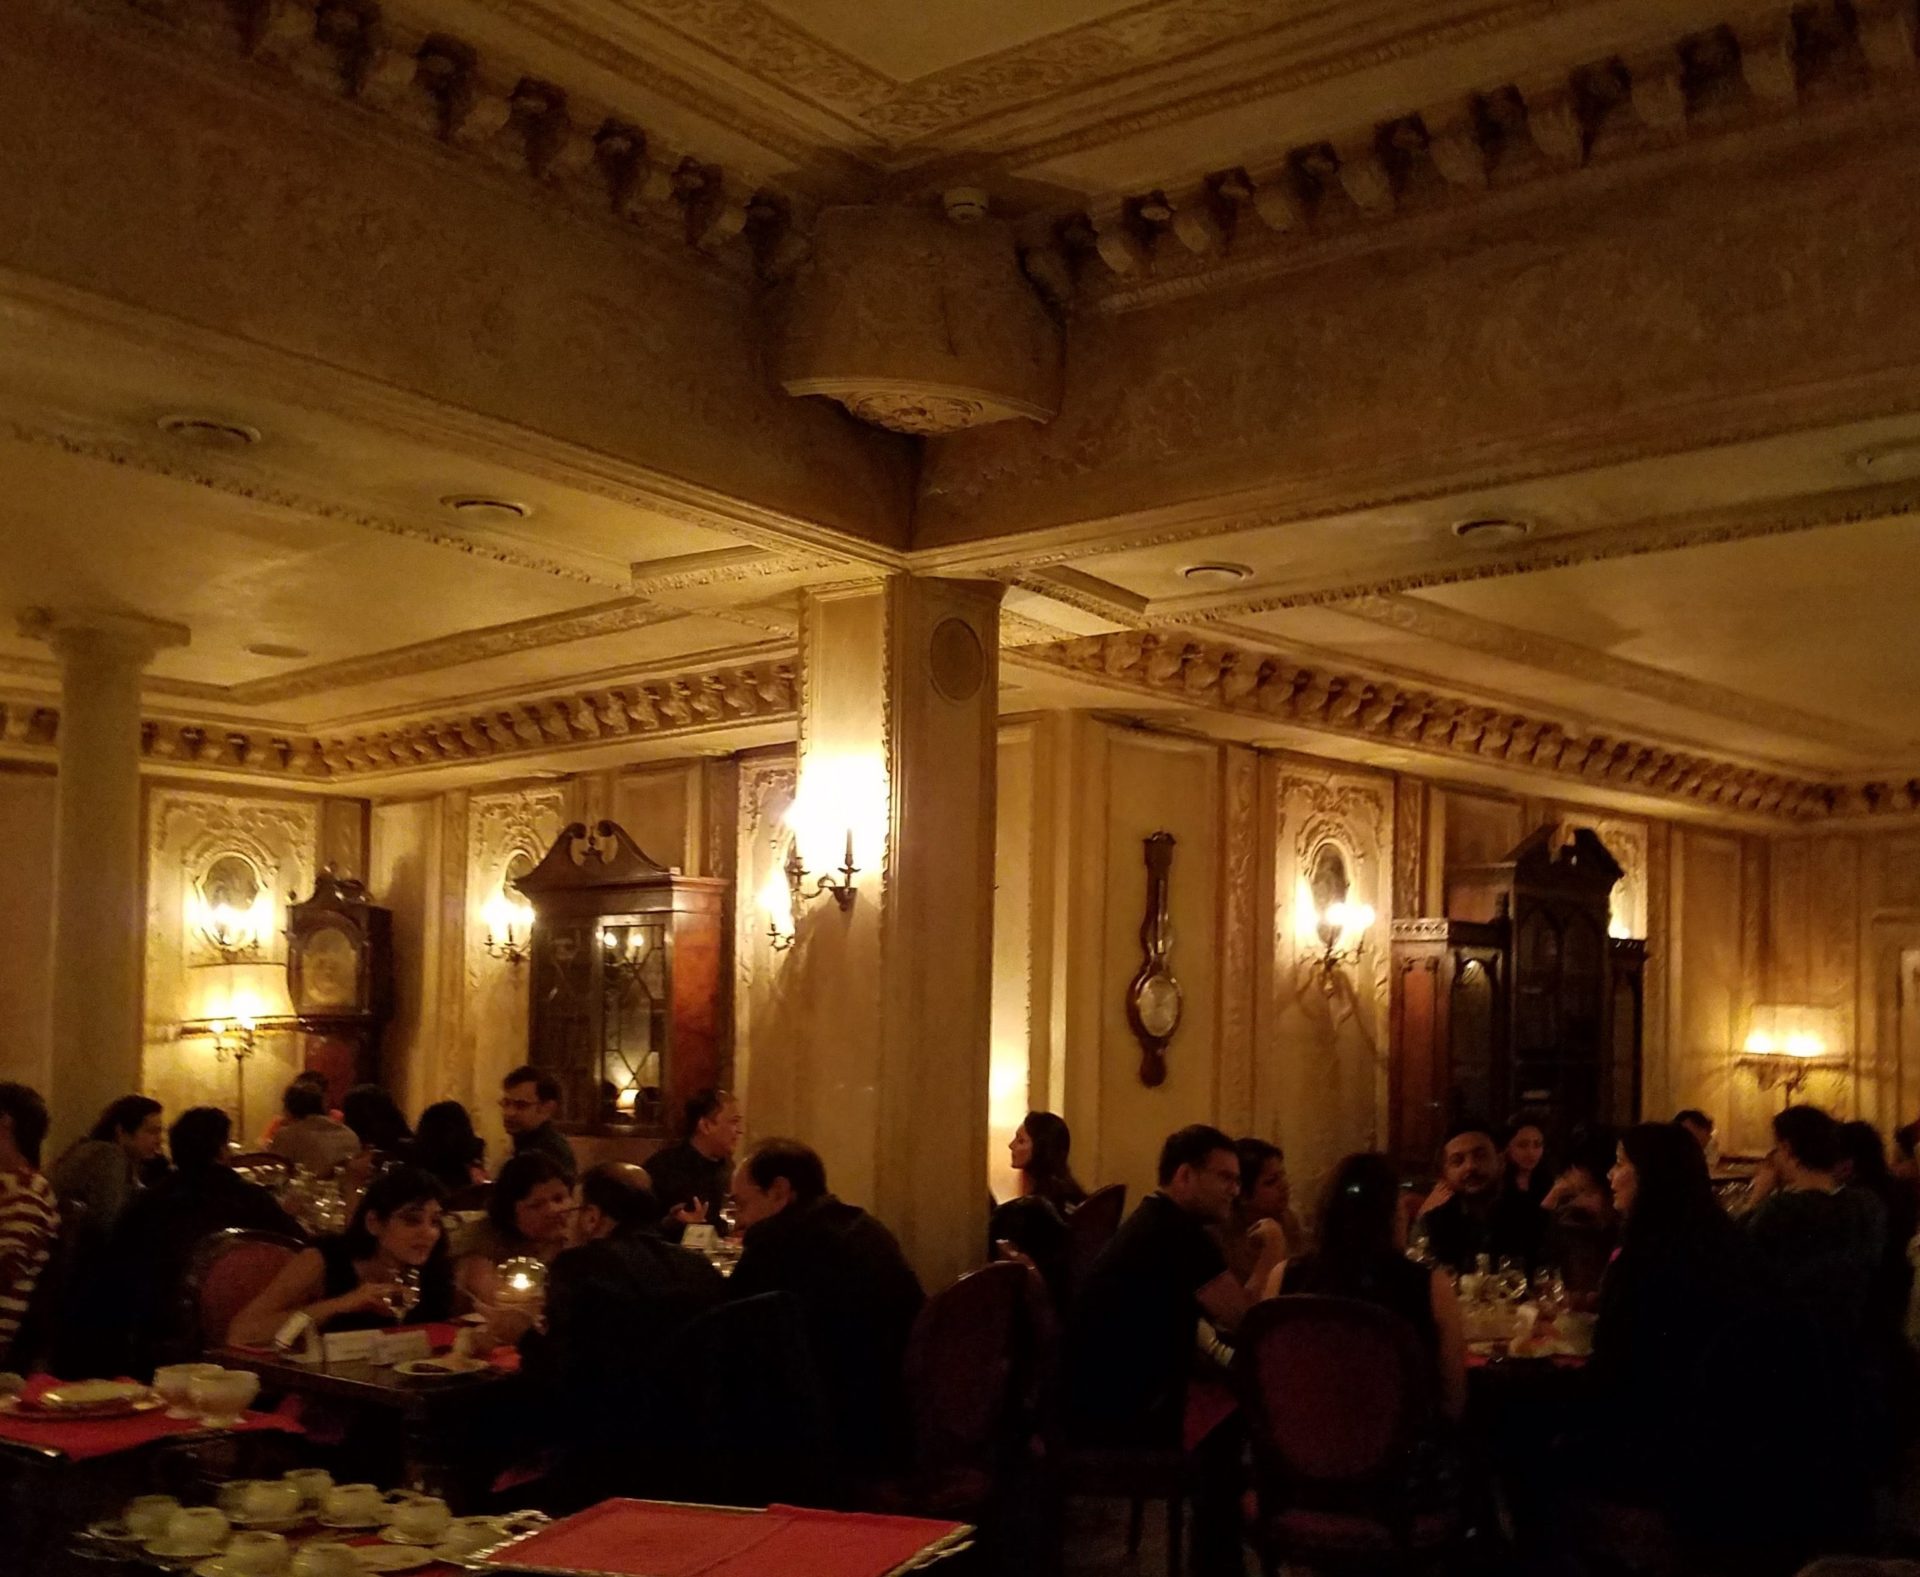 a group of people sitting at tables in a room with ornate ceiling